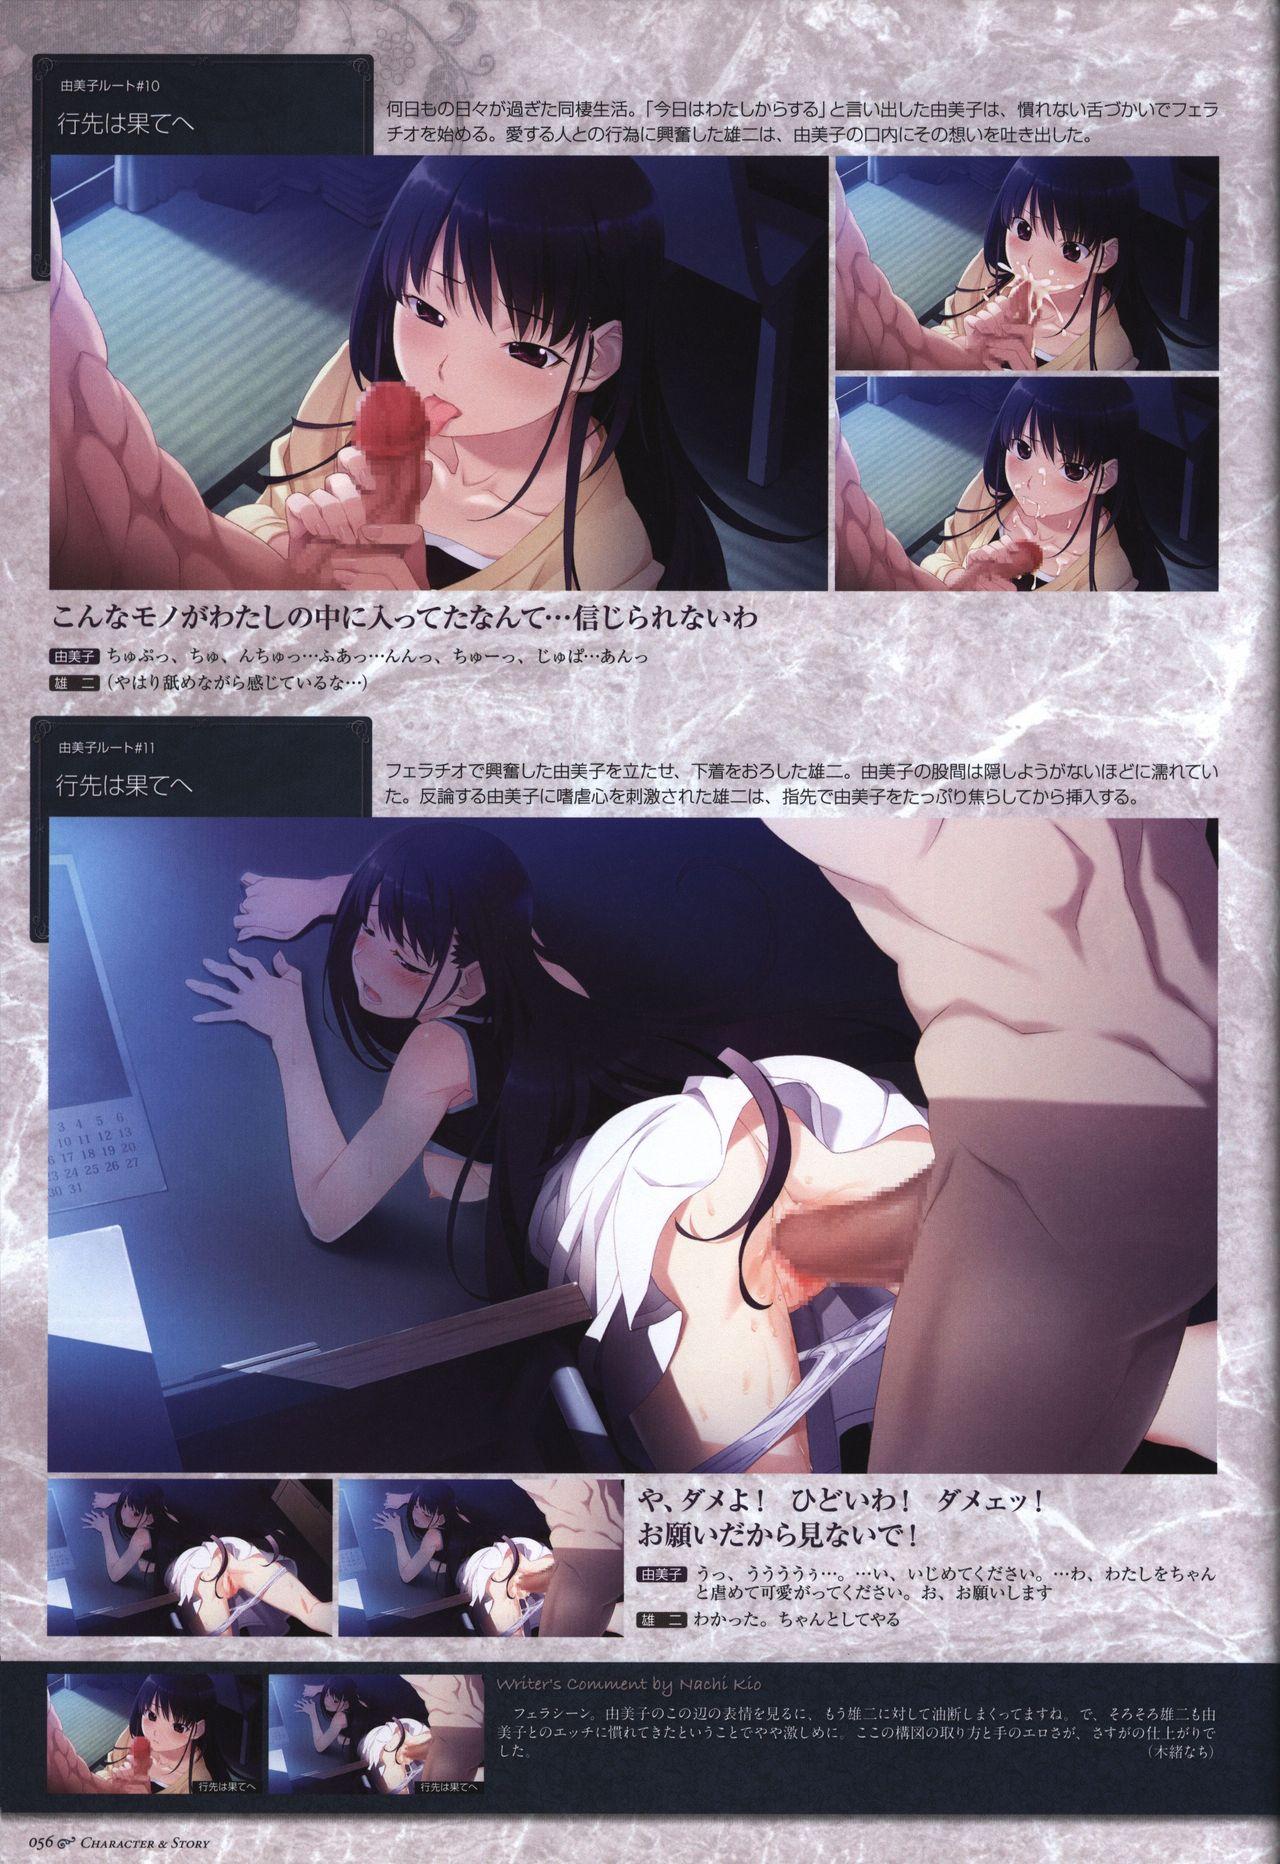 The Fruit of Grisaia Visual FanBook 56